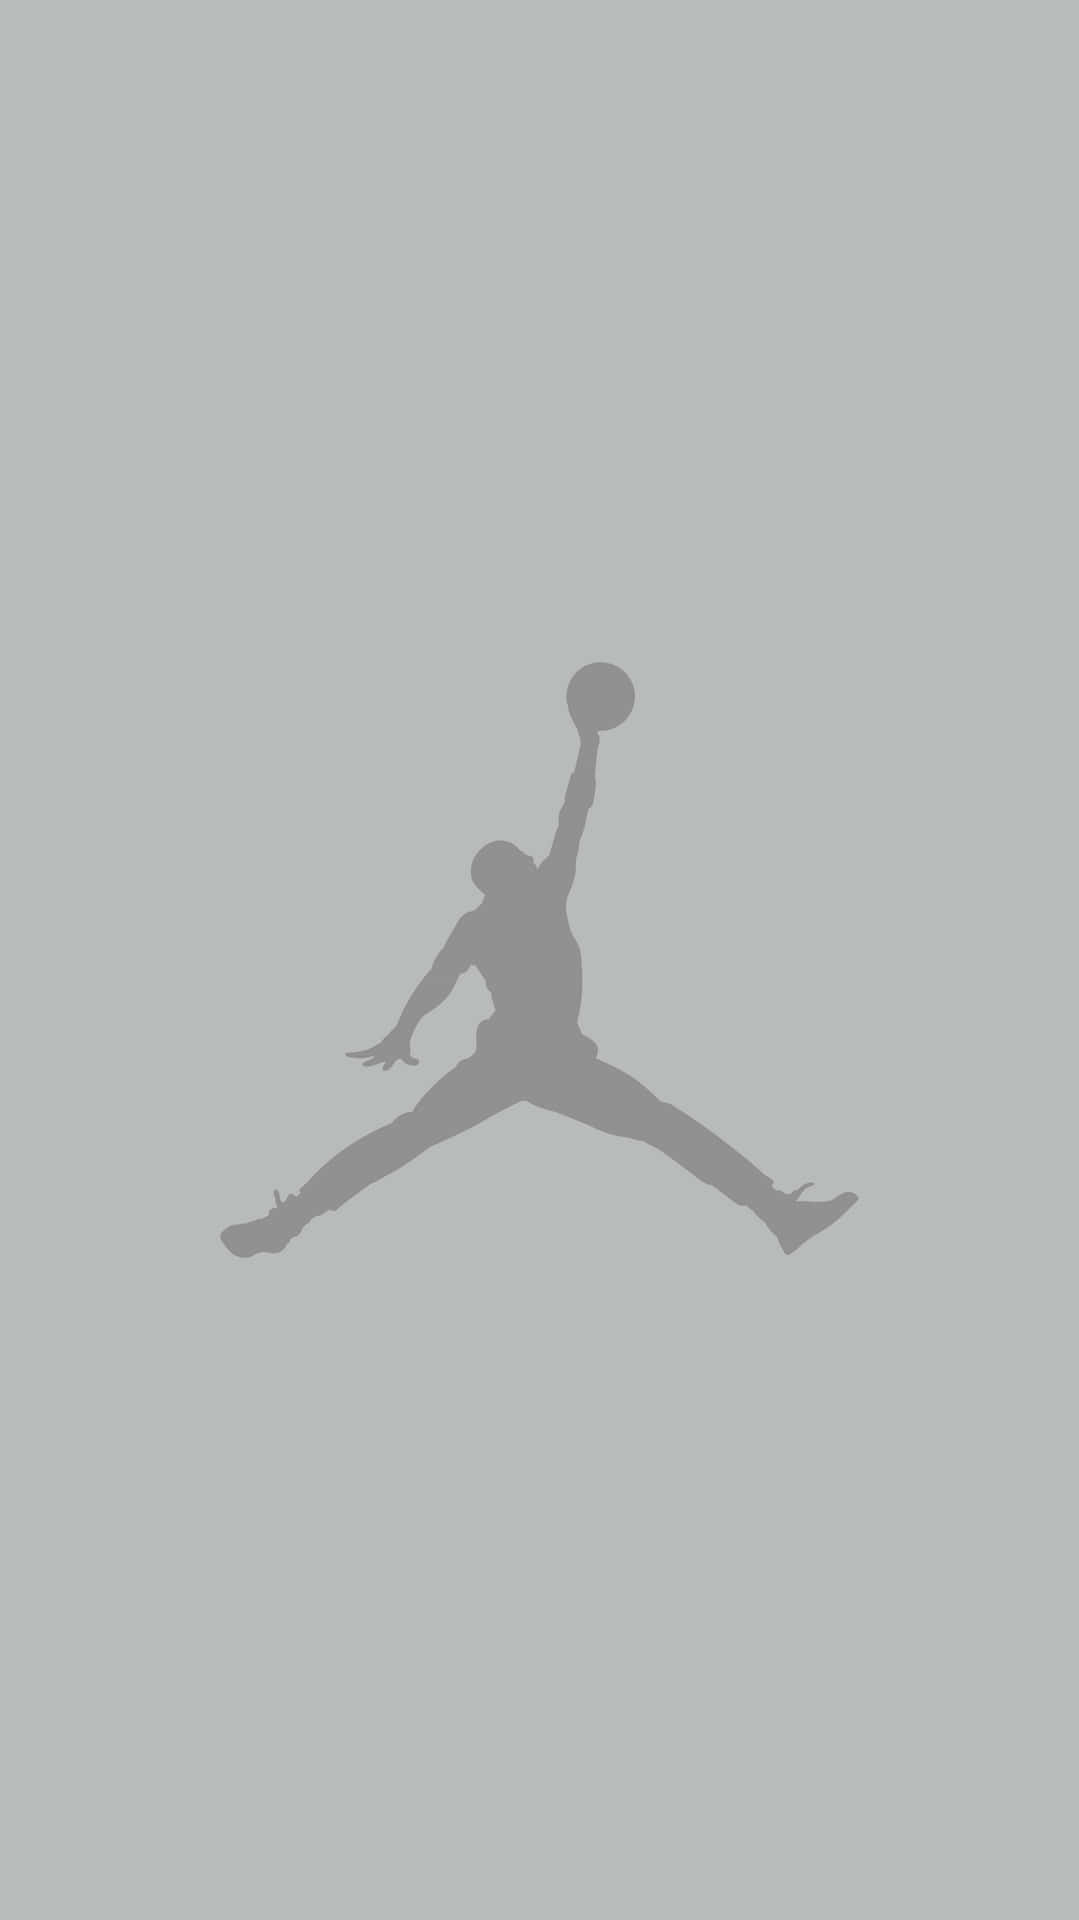 A Silhouette Of A Basketball Player Jumping In The Air Wallpaper